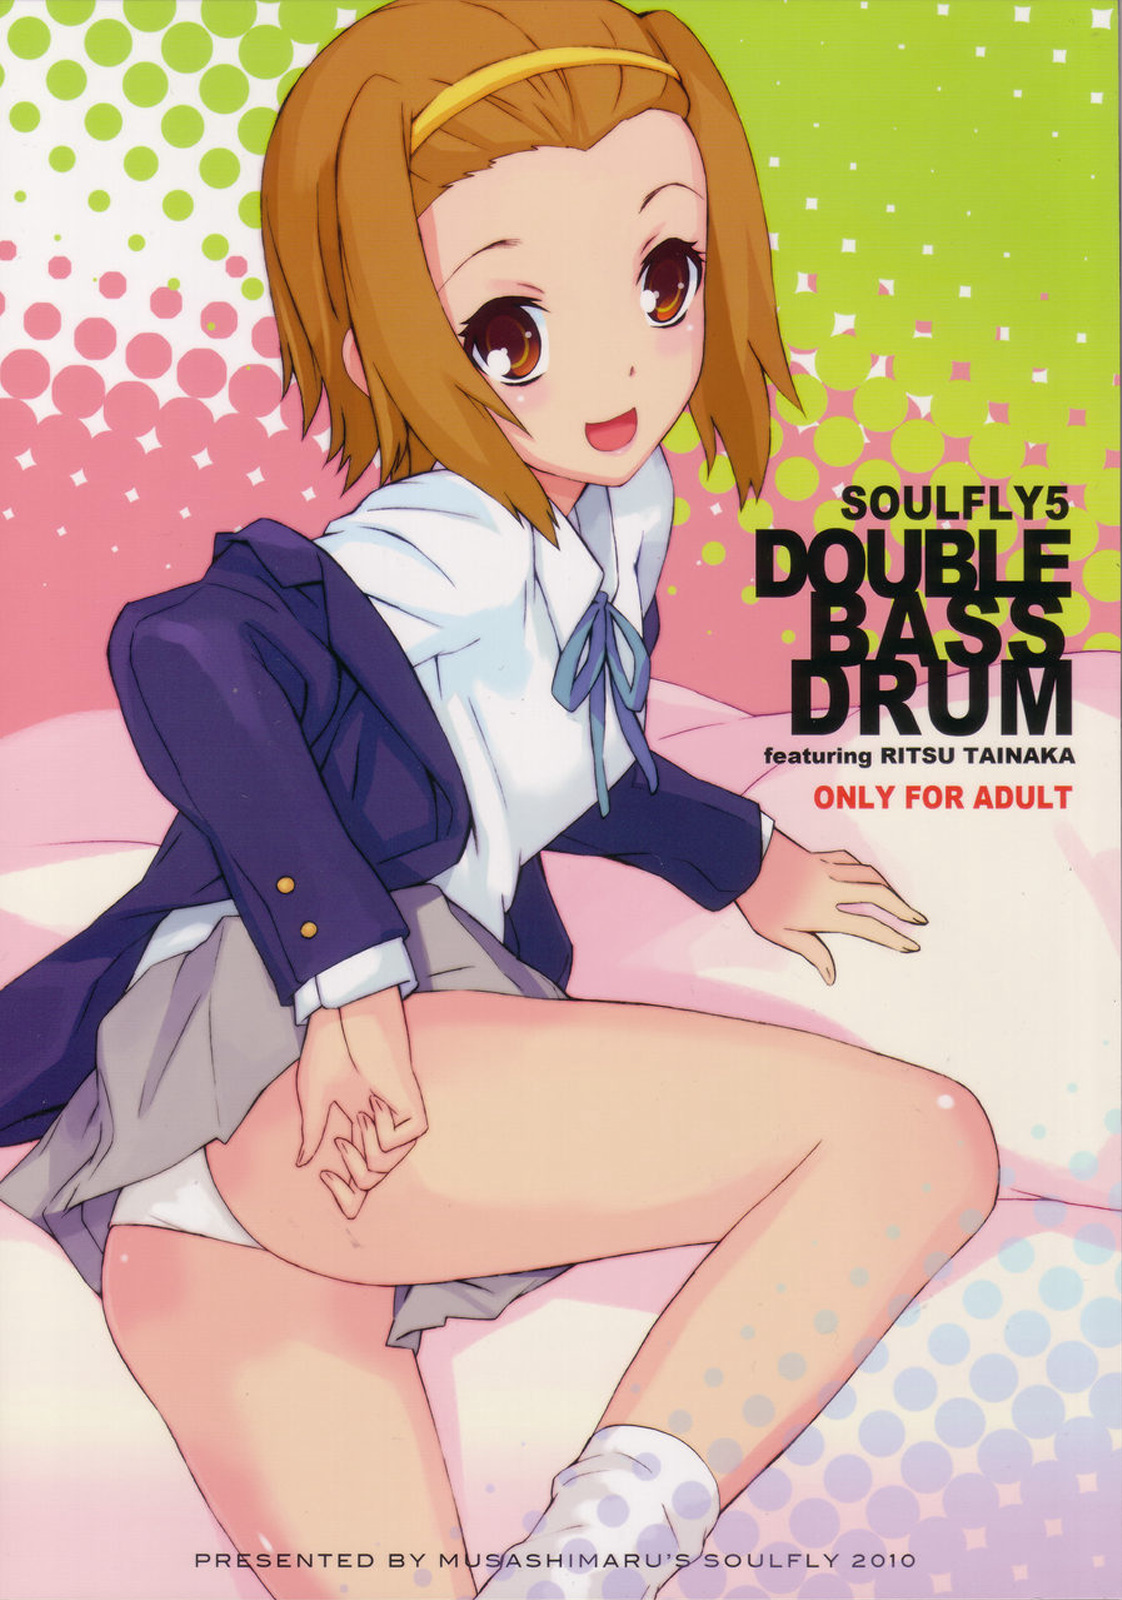 [SOULFLY] SOULFLY5 DOUBLE BASS DRUM featuring RITSU TAINAKA (K-ON) [SOULFLY] SOULFLY5 DOUBLE BASS DRUM featuring RITSU TAINAKA (けいおん)